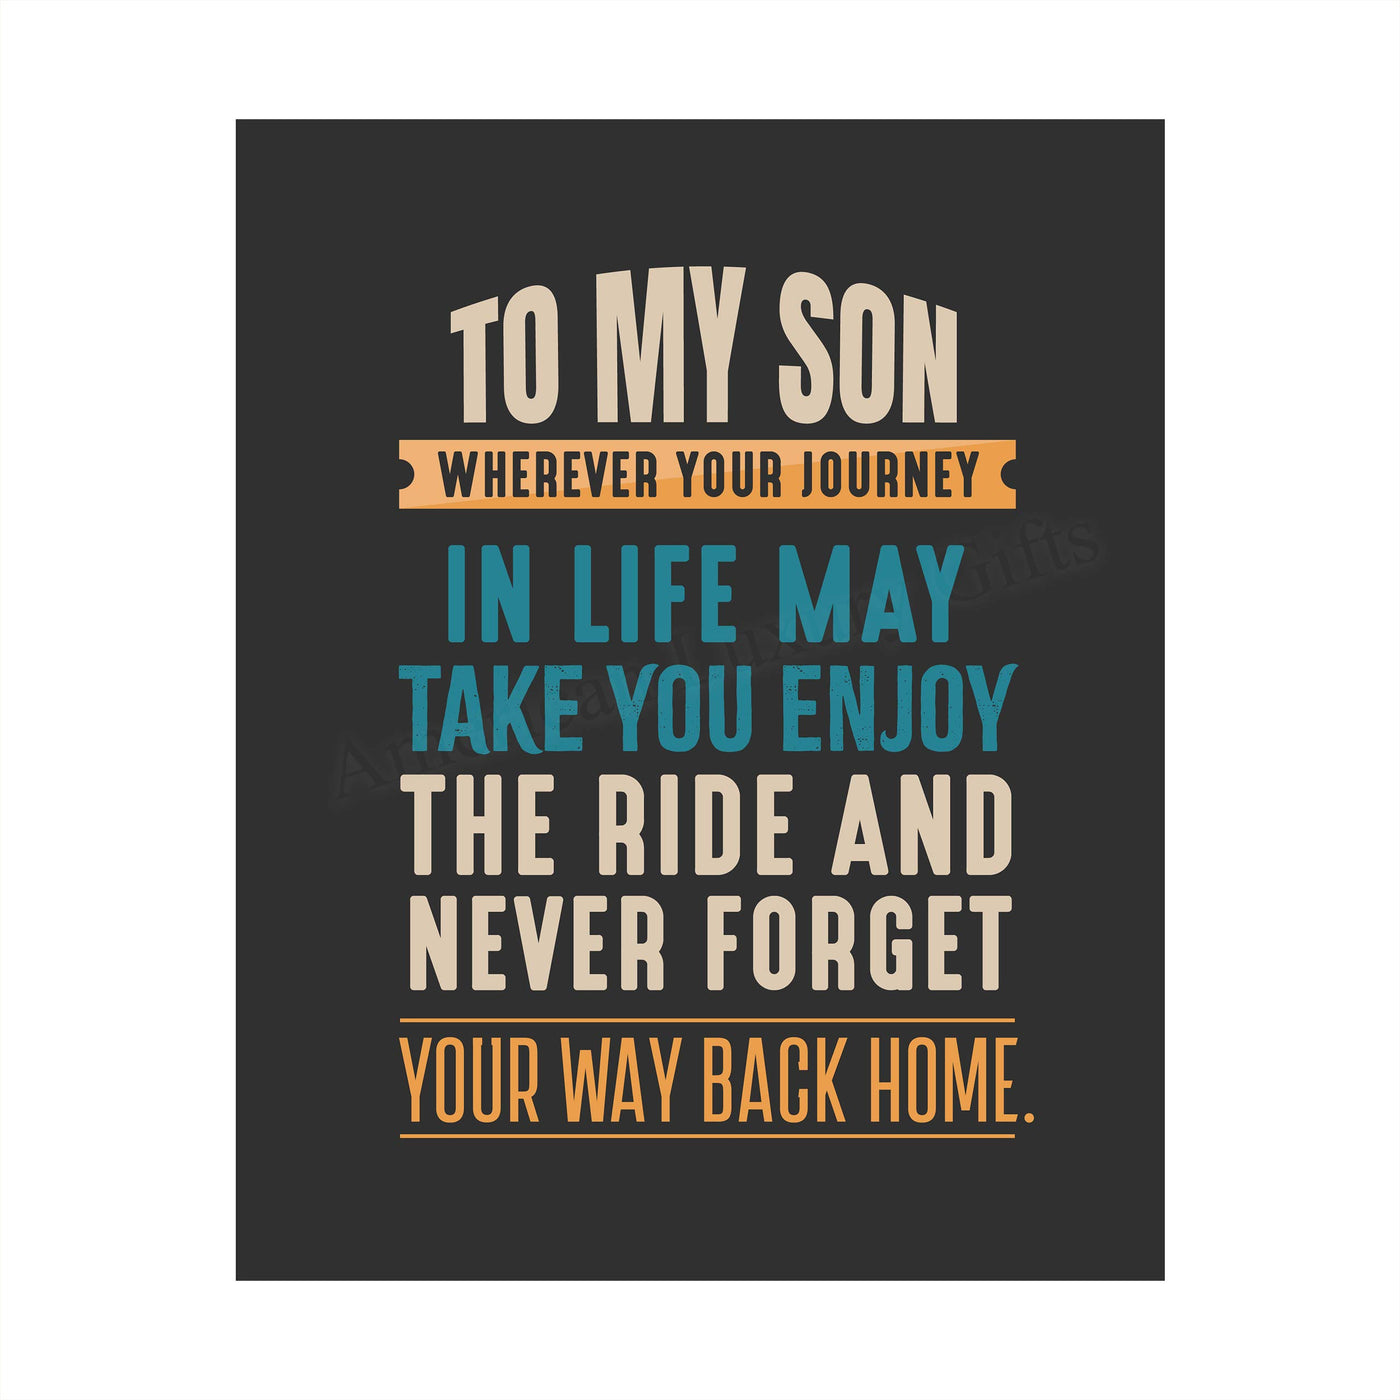 To My Son-Never Forget Your Way Back Home Inspirational Wall Art Sign -8 x 10" Typographic Poster Print-Ready to Frame. Lifetime Keepsake for Any Son On Any Occasion. Great Graduation Gift!